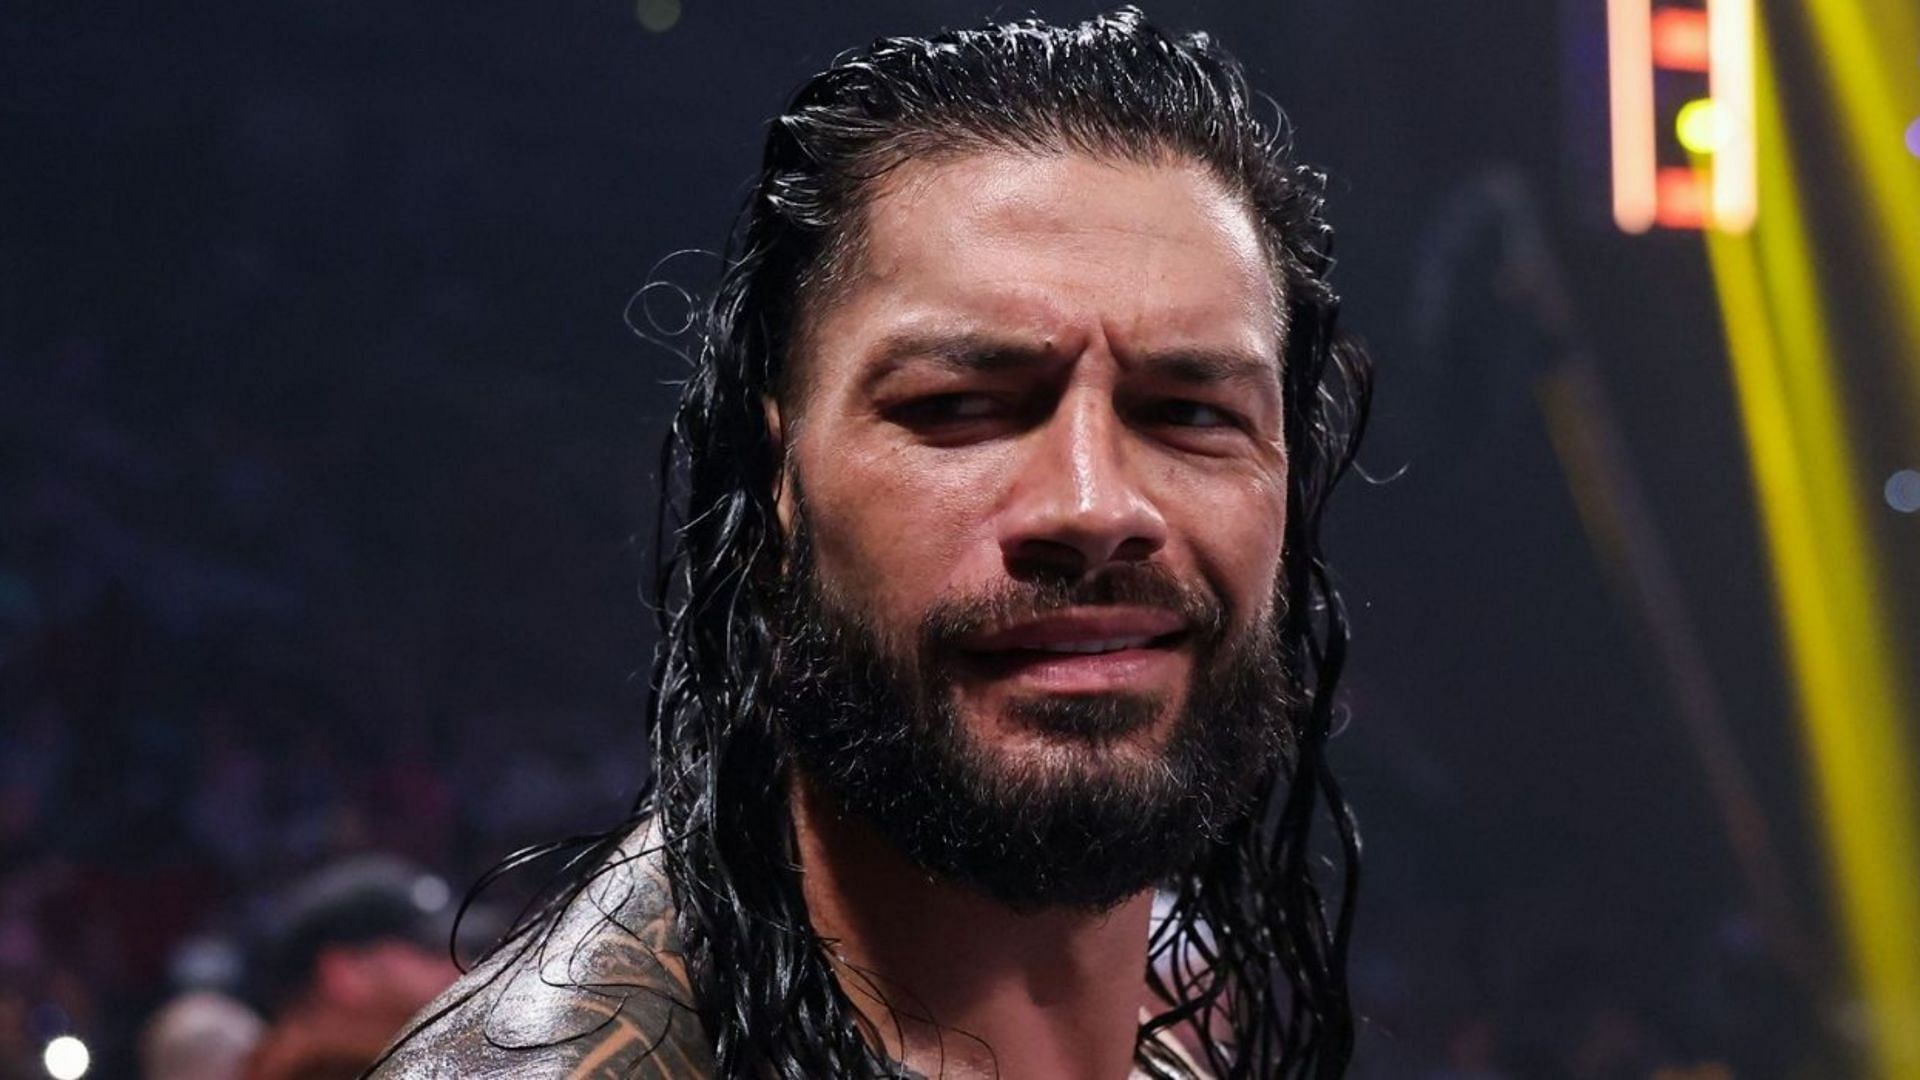 The Undisputed WWE Universal Champion Roman Reigns